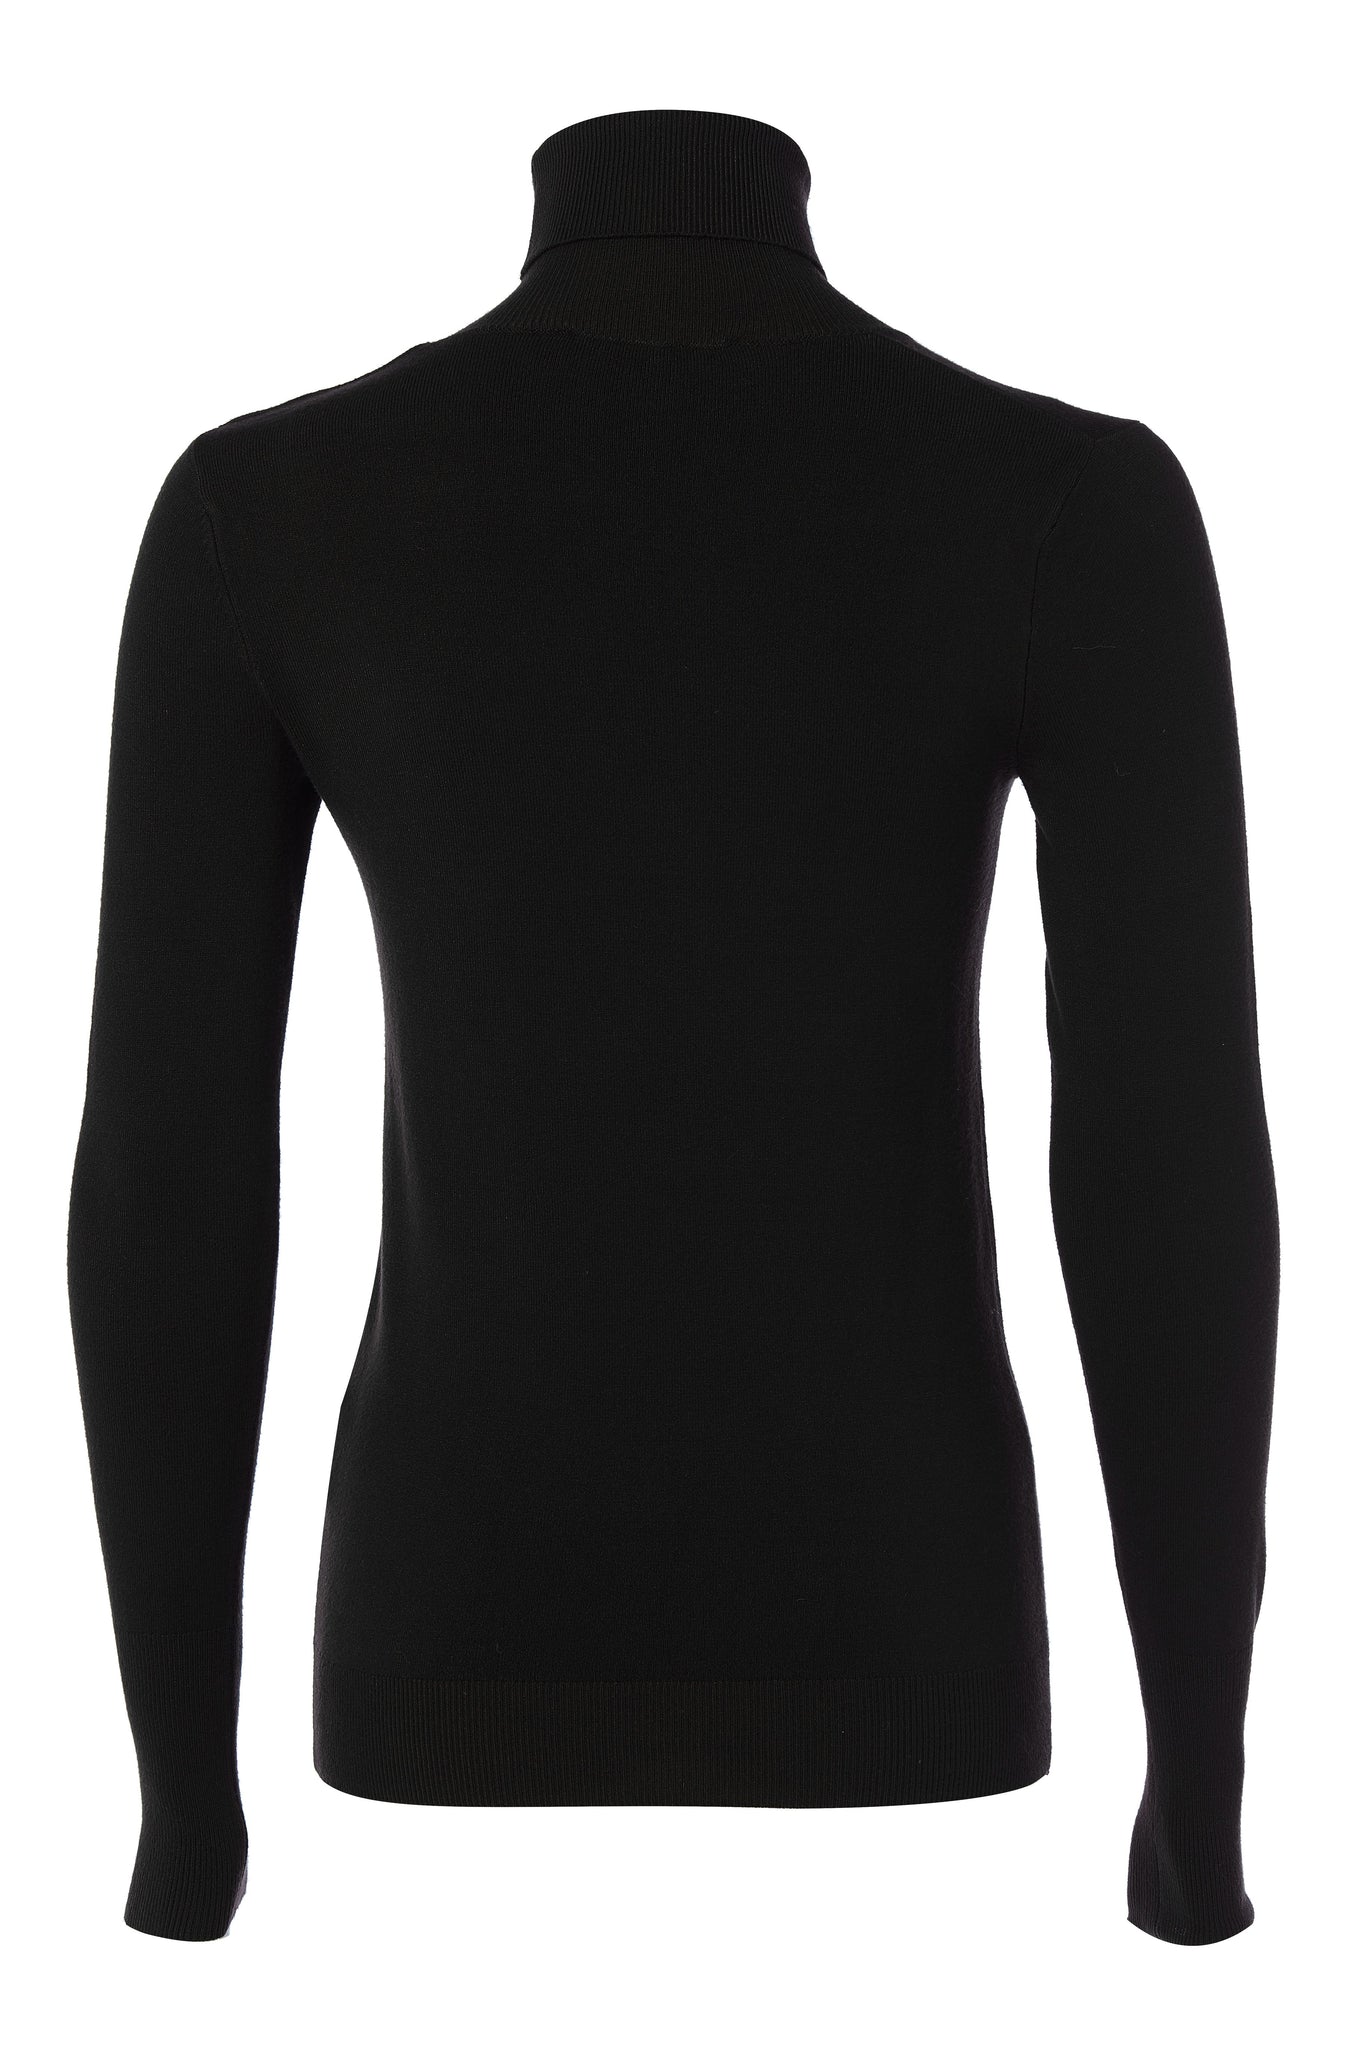 back of super soft lightweight jumper in black with ribbed roll neck collar, cuffs and hem